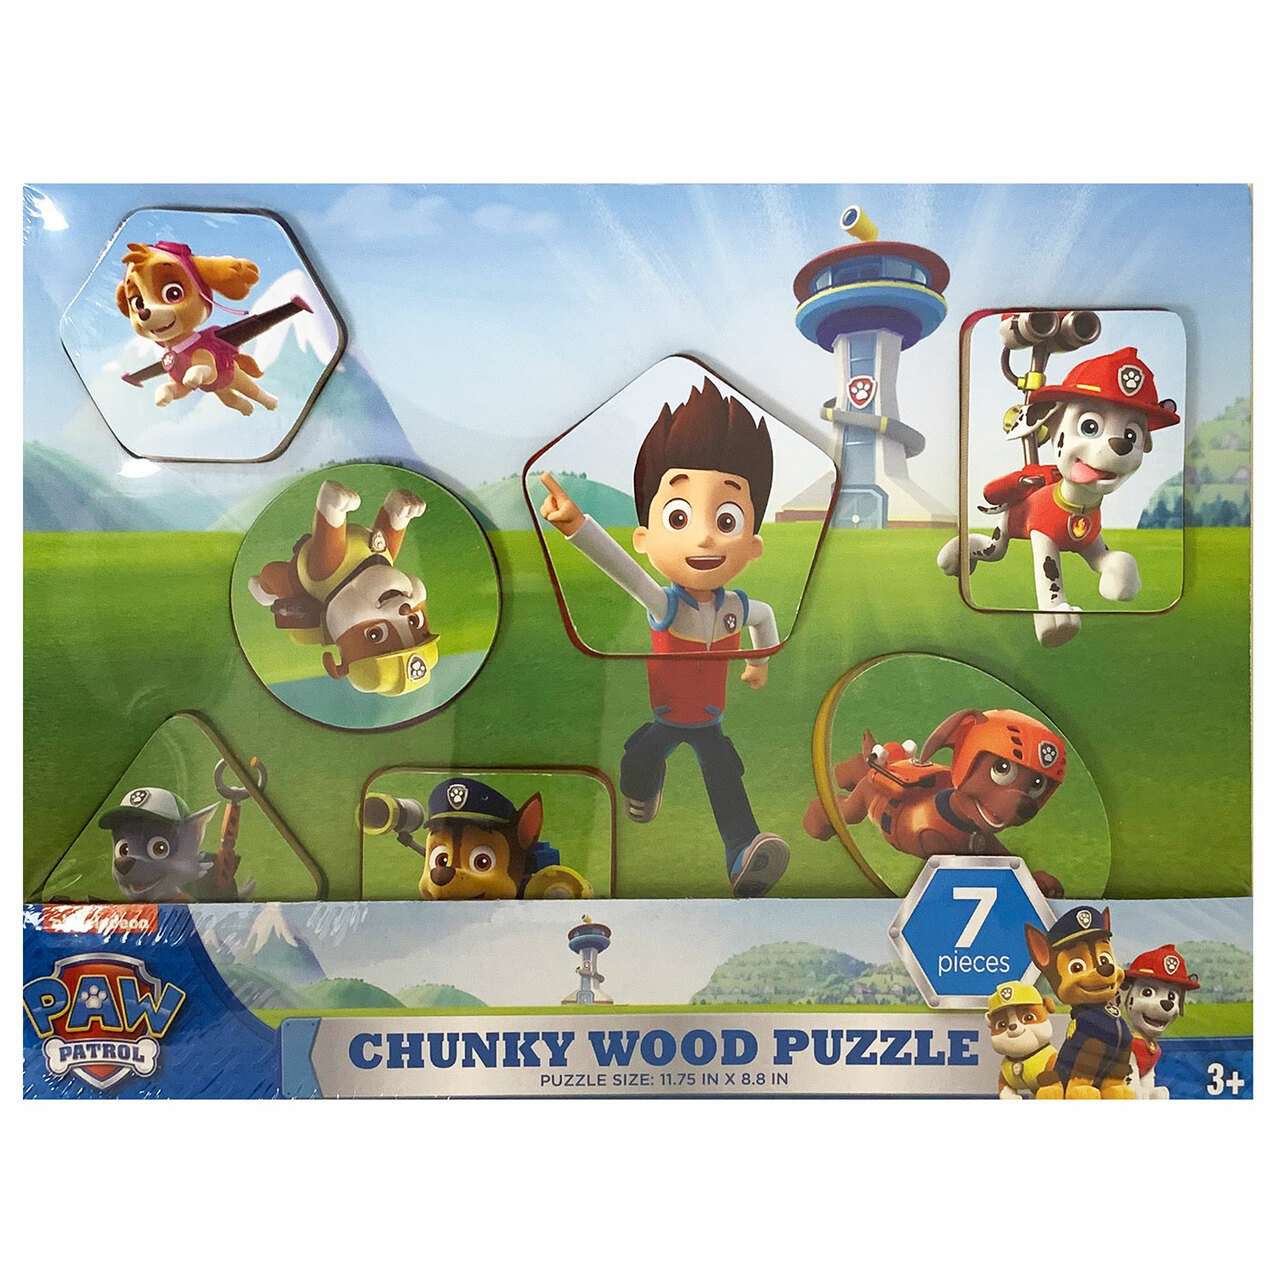 Paw Patrol Chunky Wood Puzzle Style (Assorted Styles) in Best Price